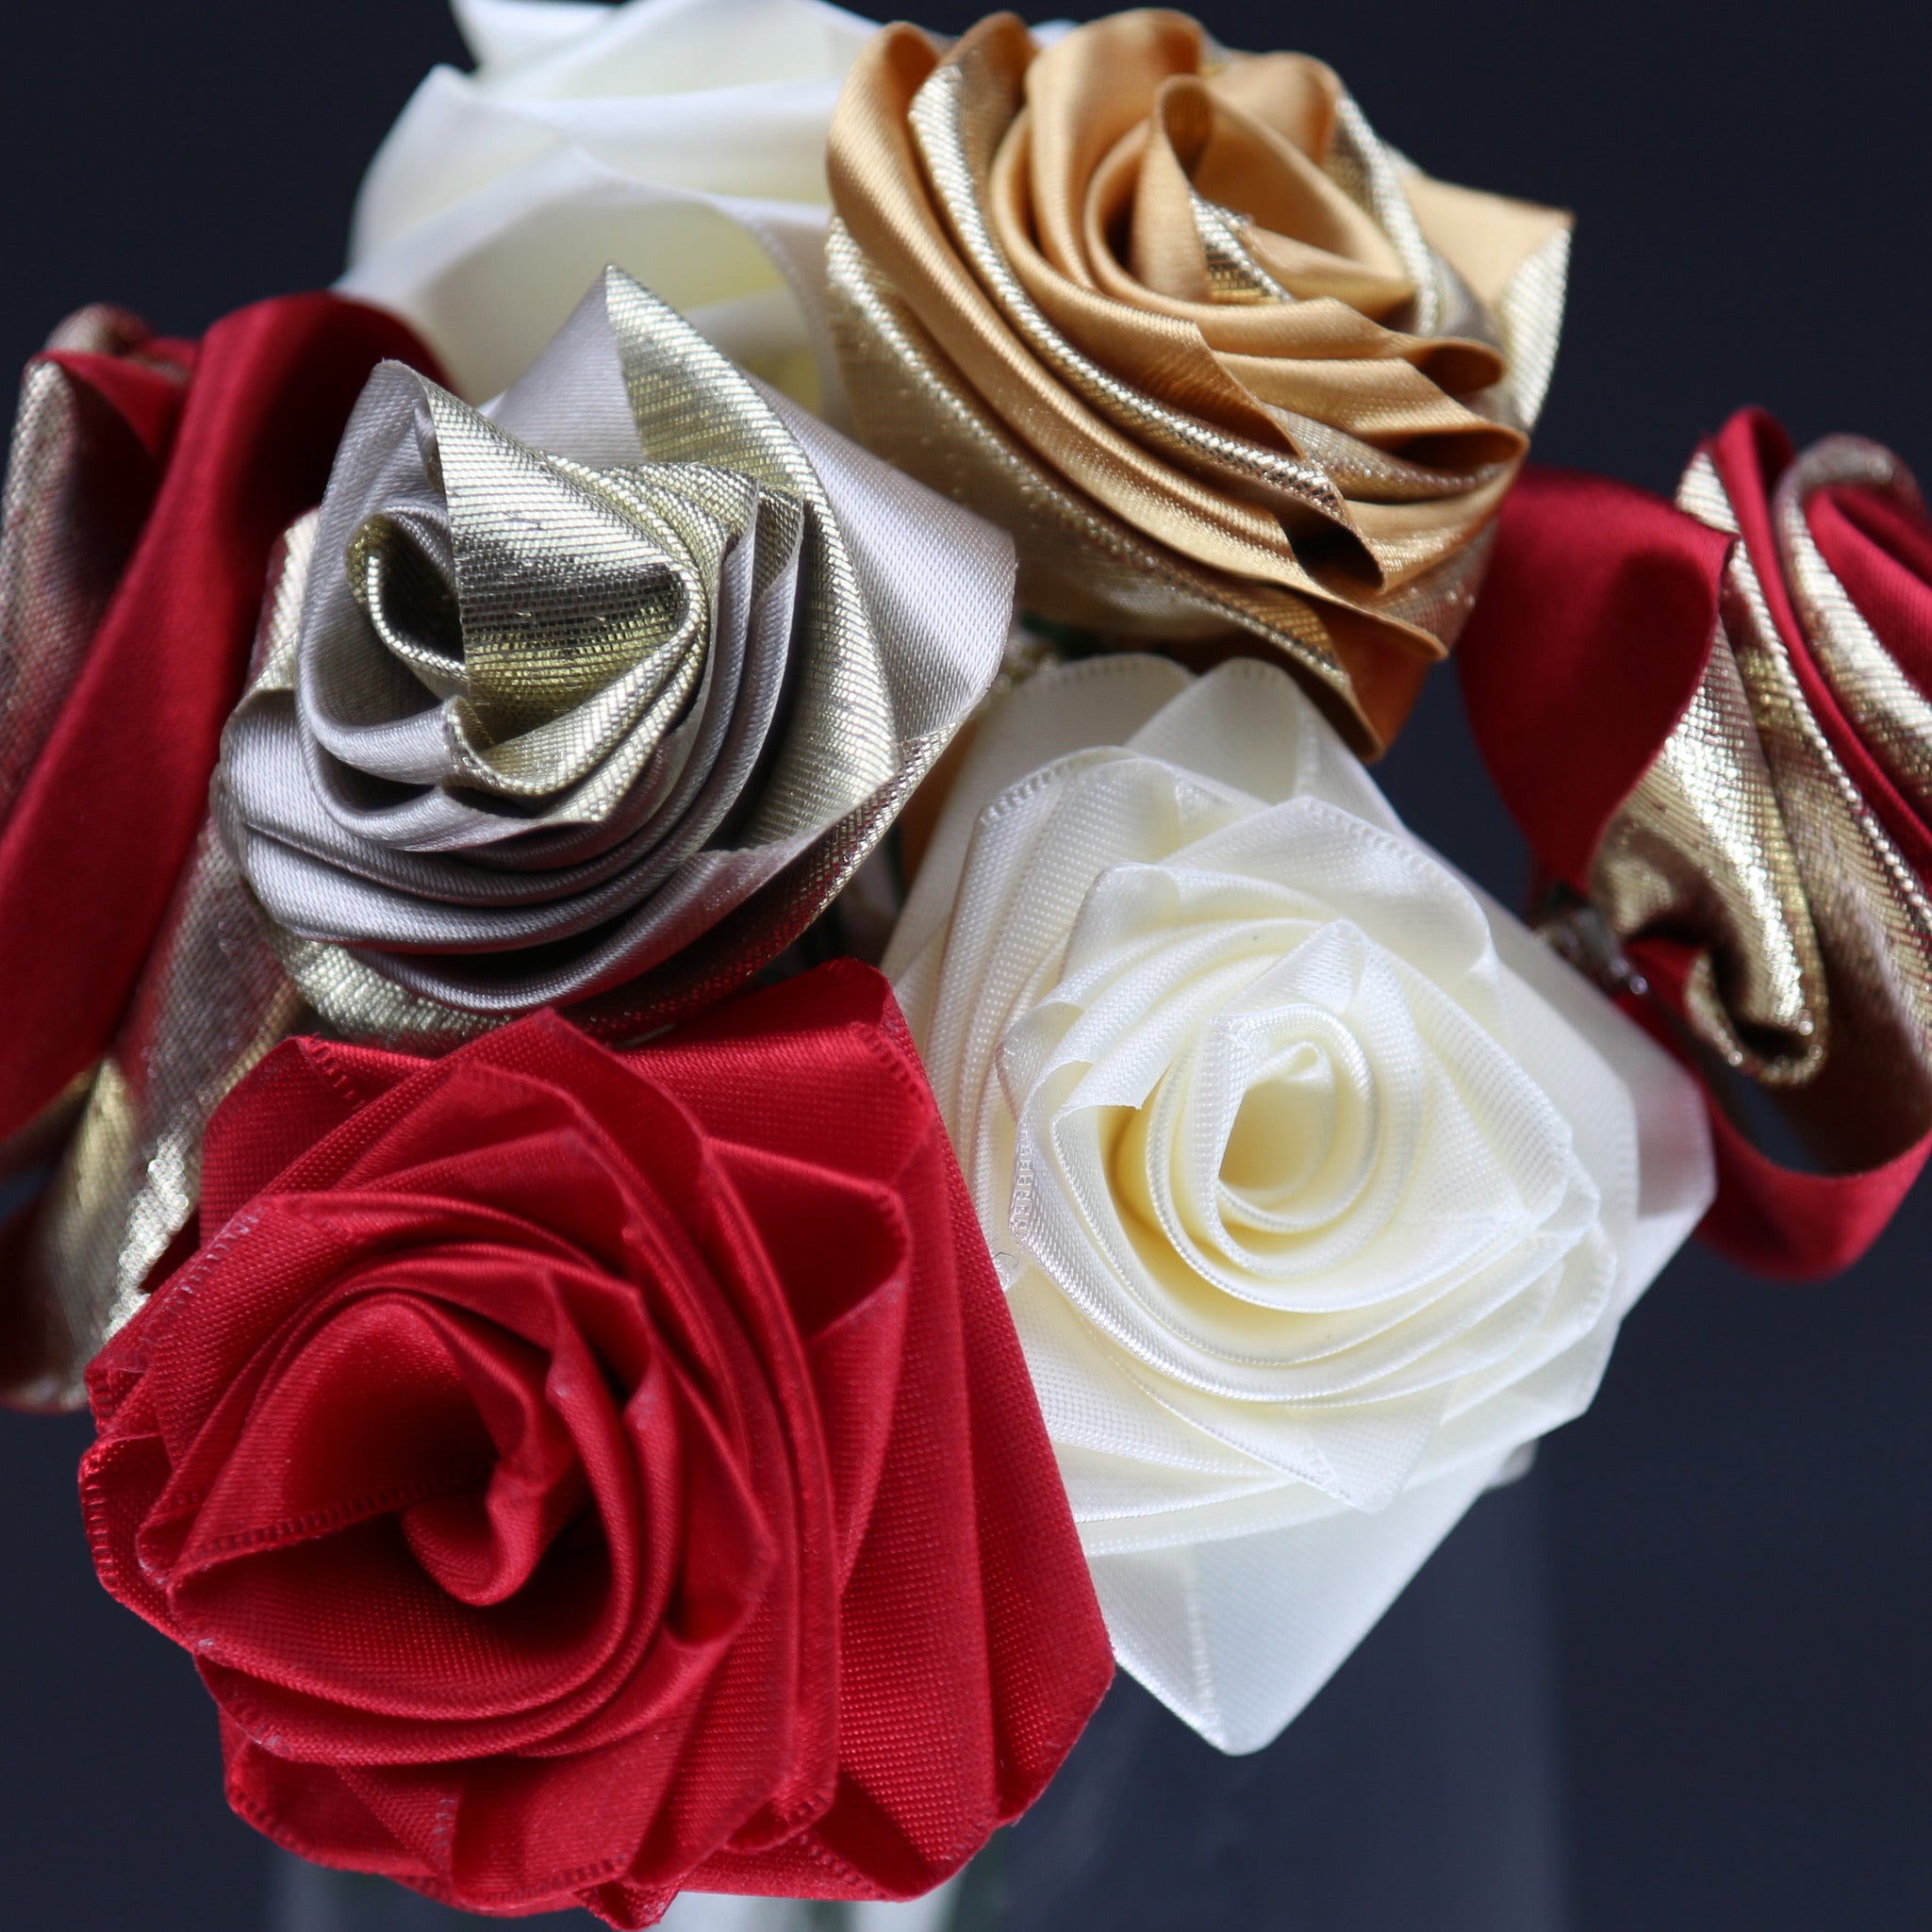 How to Make Roses out of Ribbon